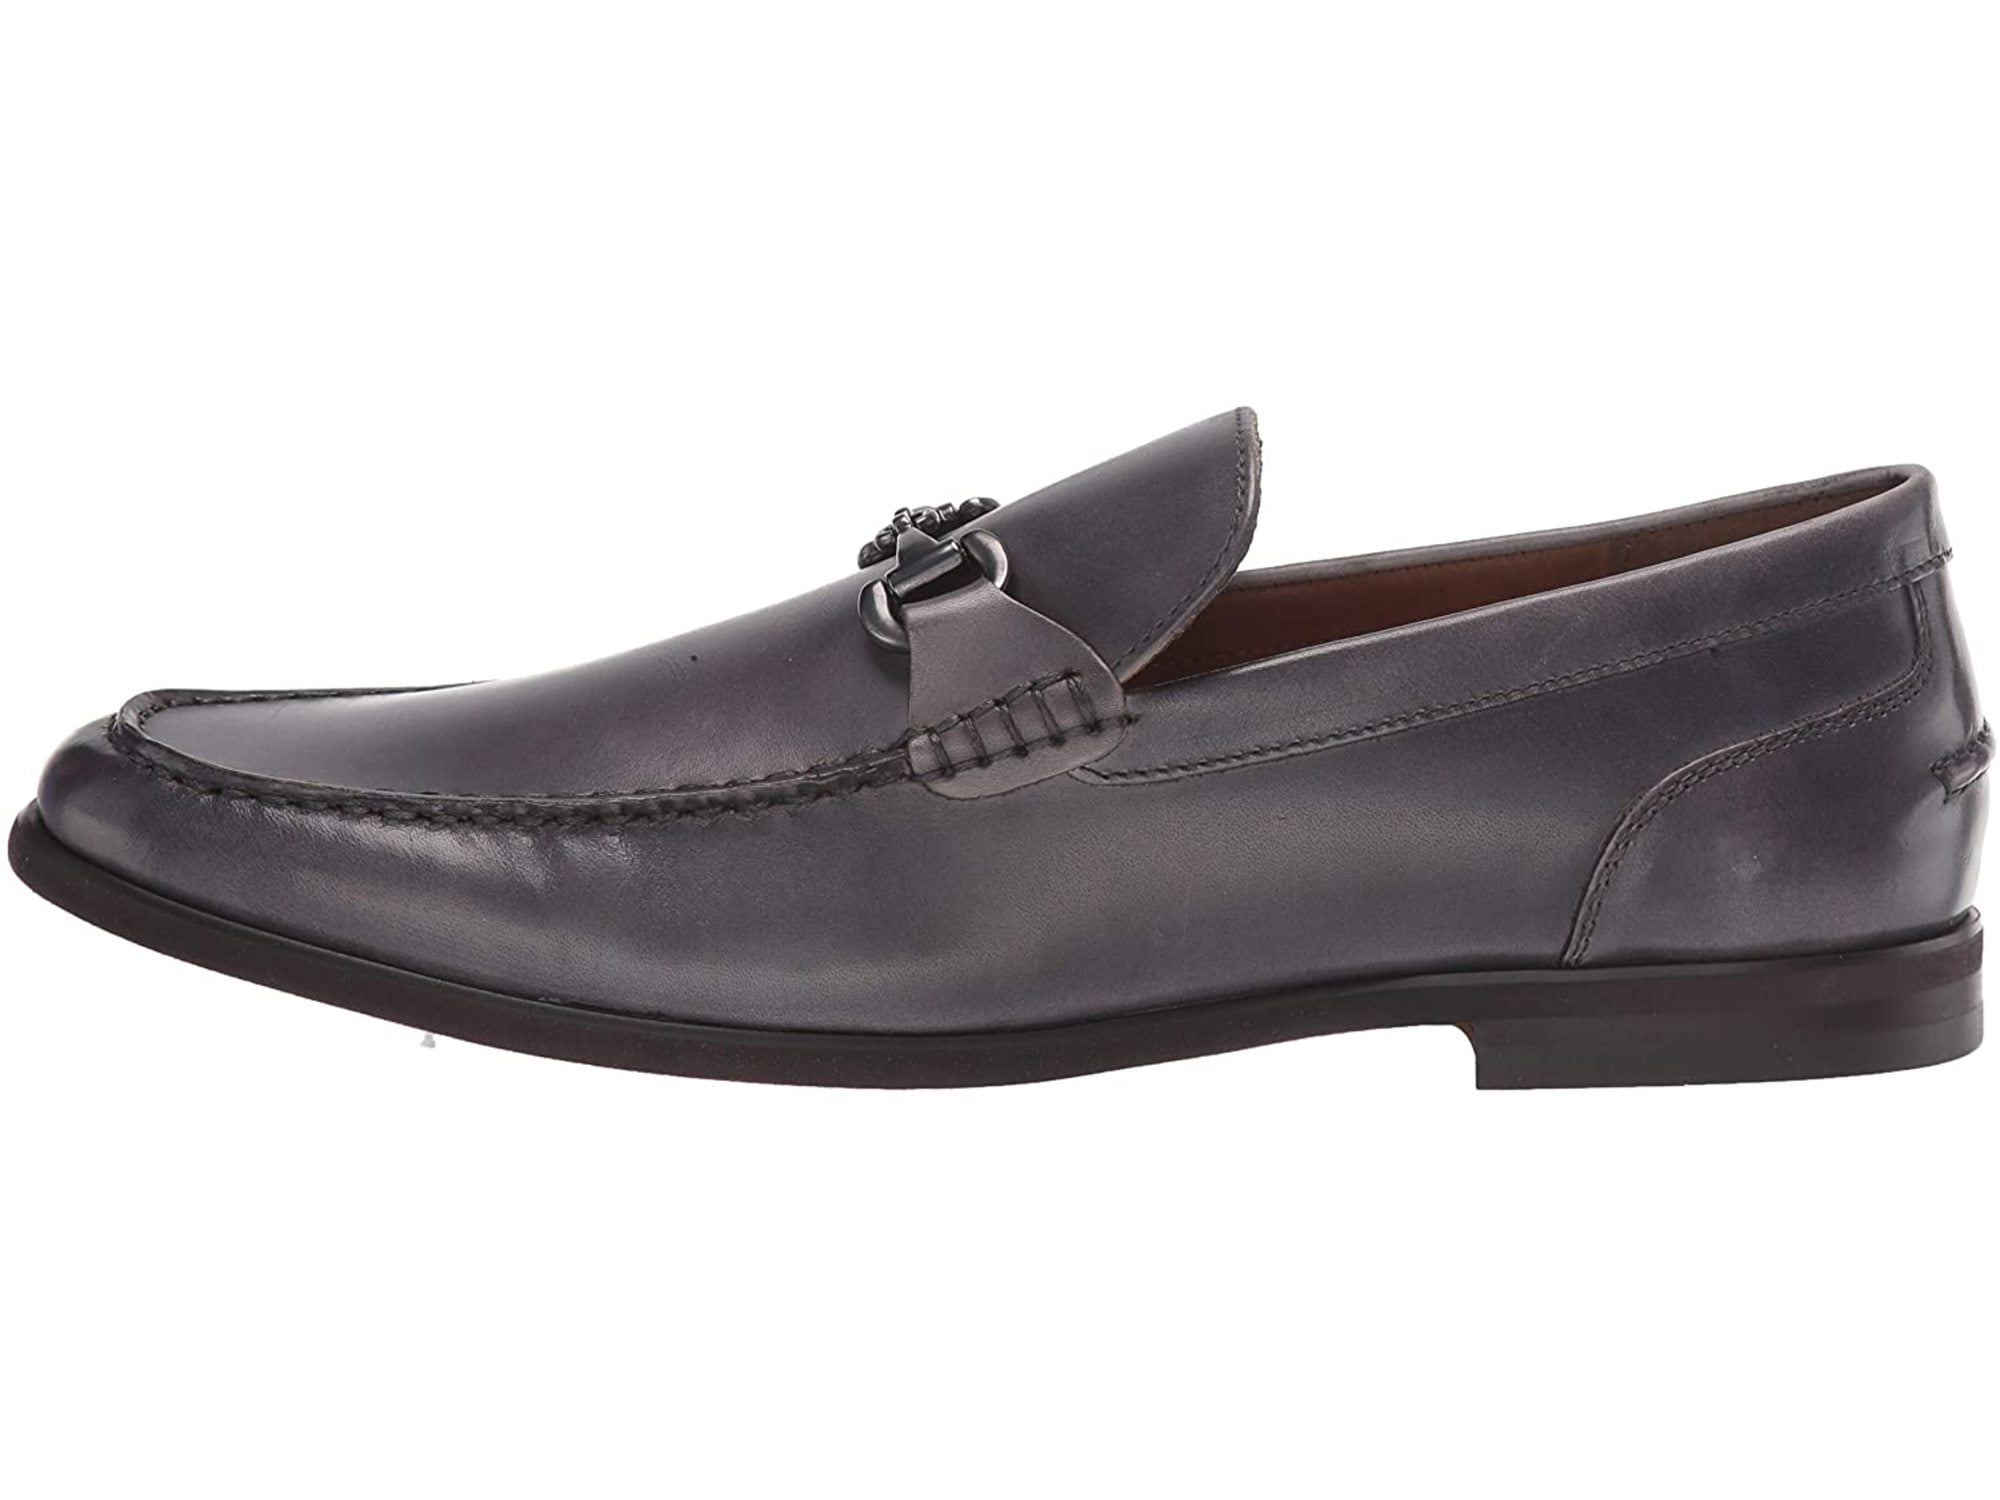 Kenneth Cole Reaction - Kenneth Cole Reaction Men's Shoes Crespo loafer ...